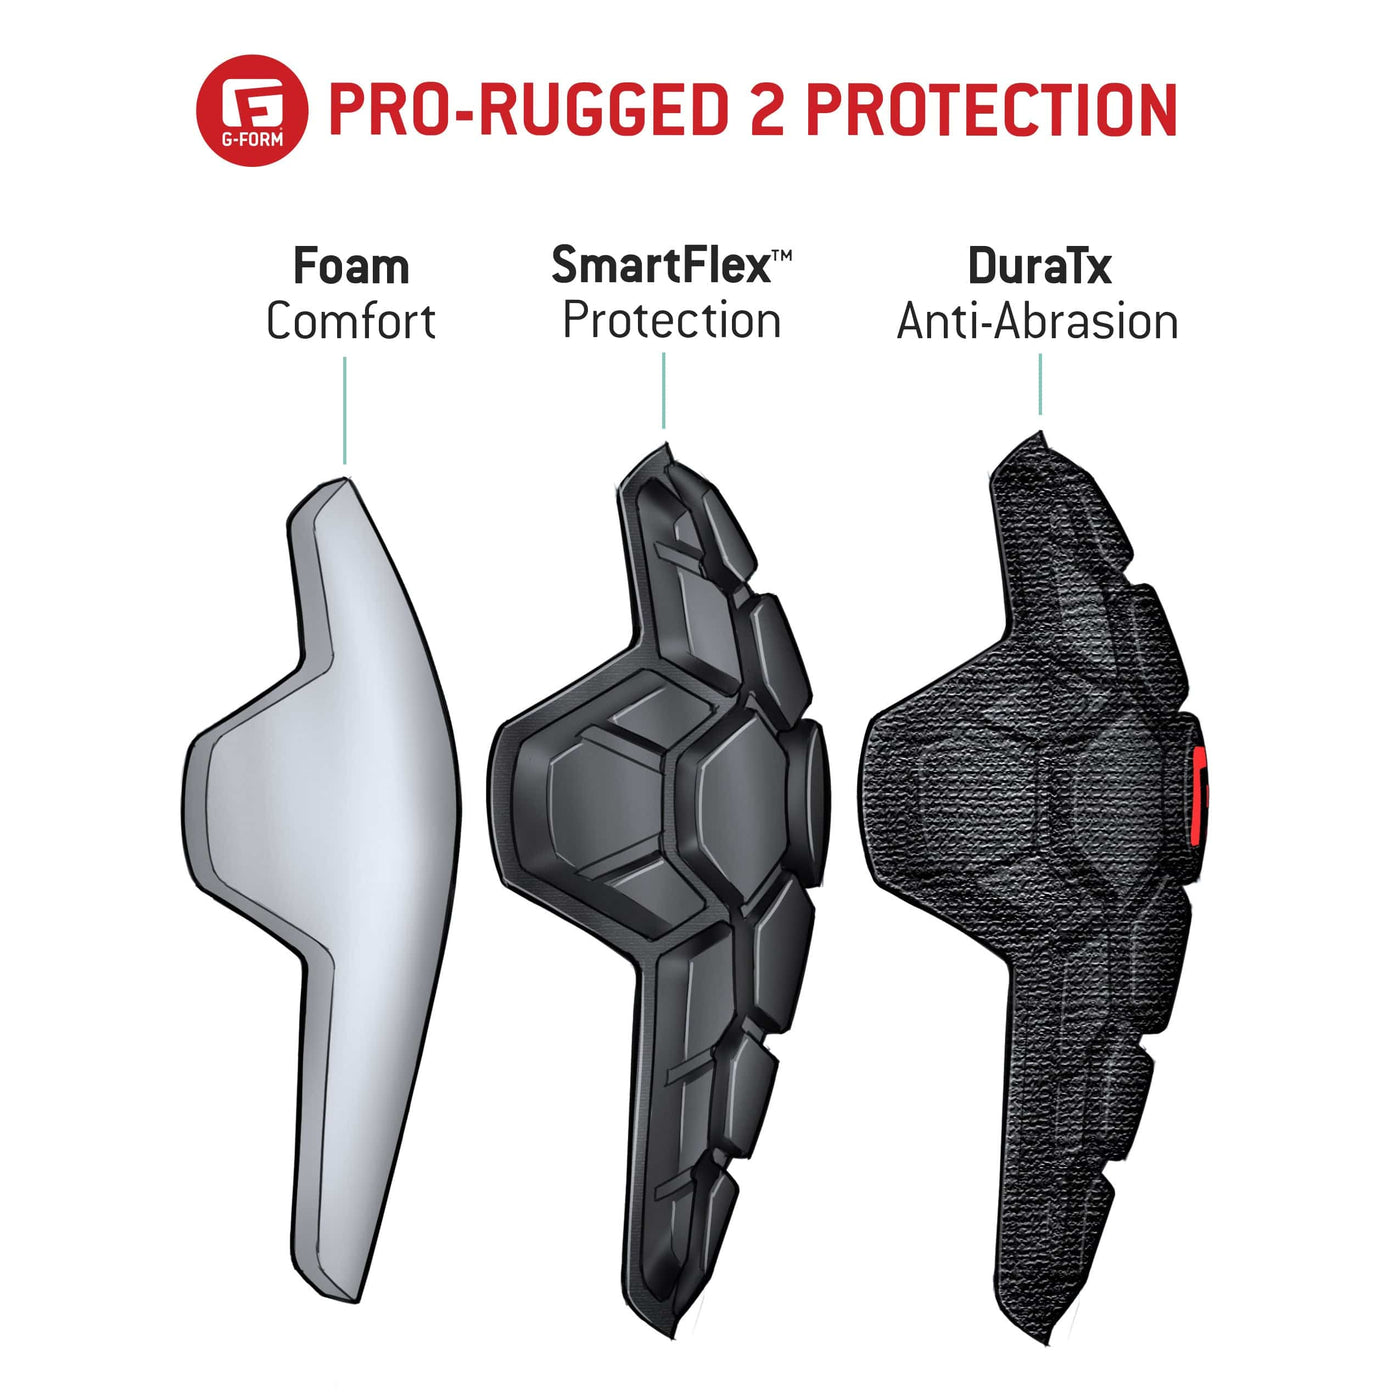 Pro-rugged 2 protection knee guards